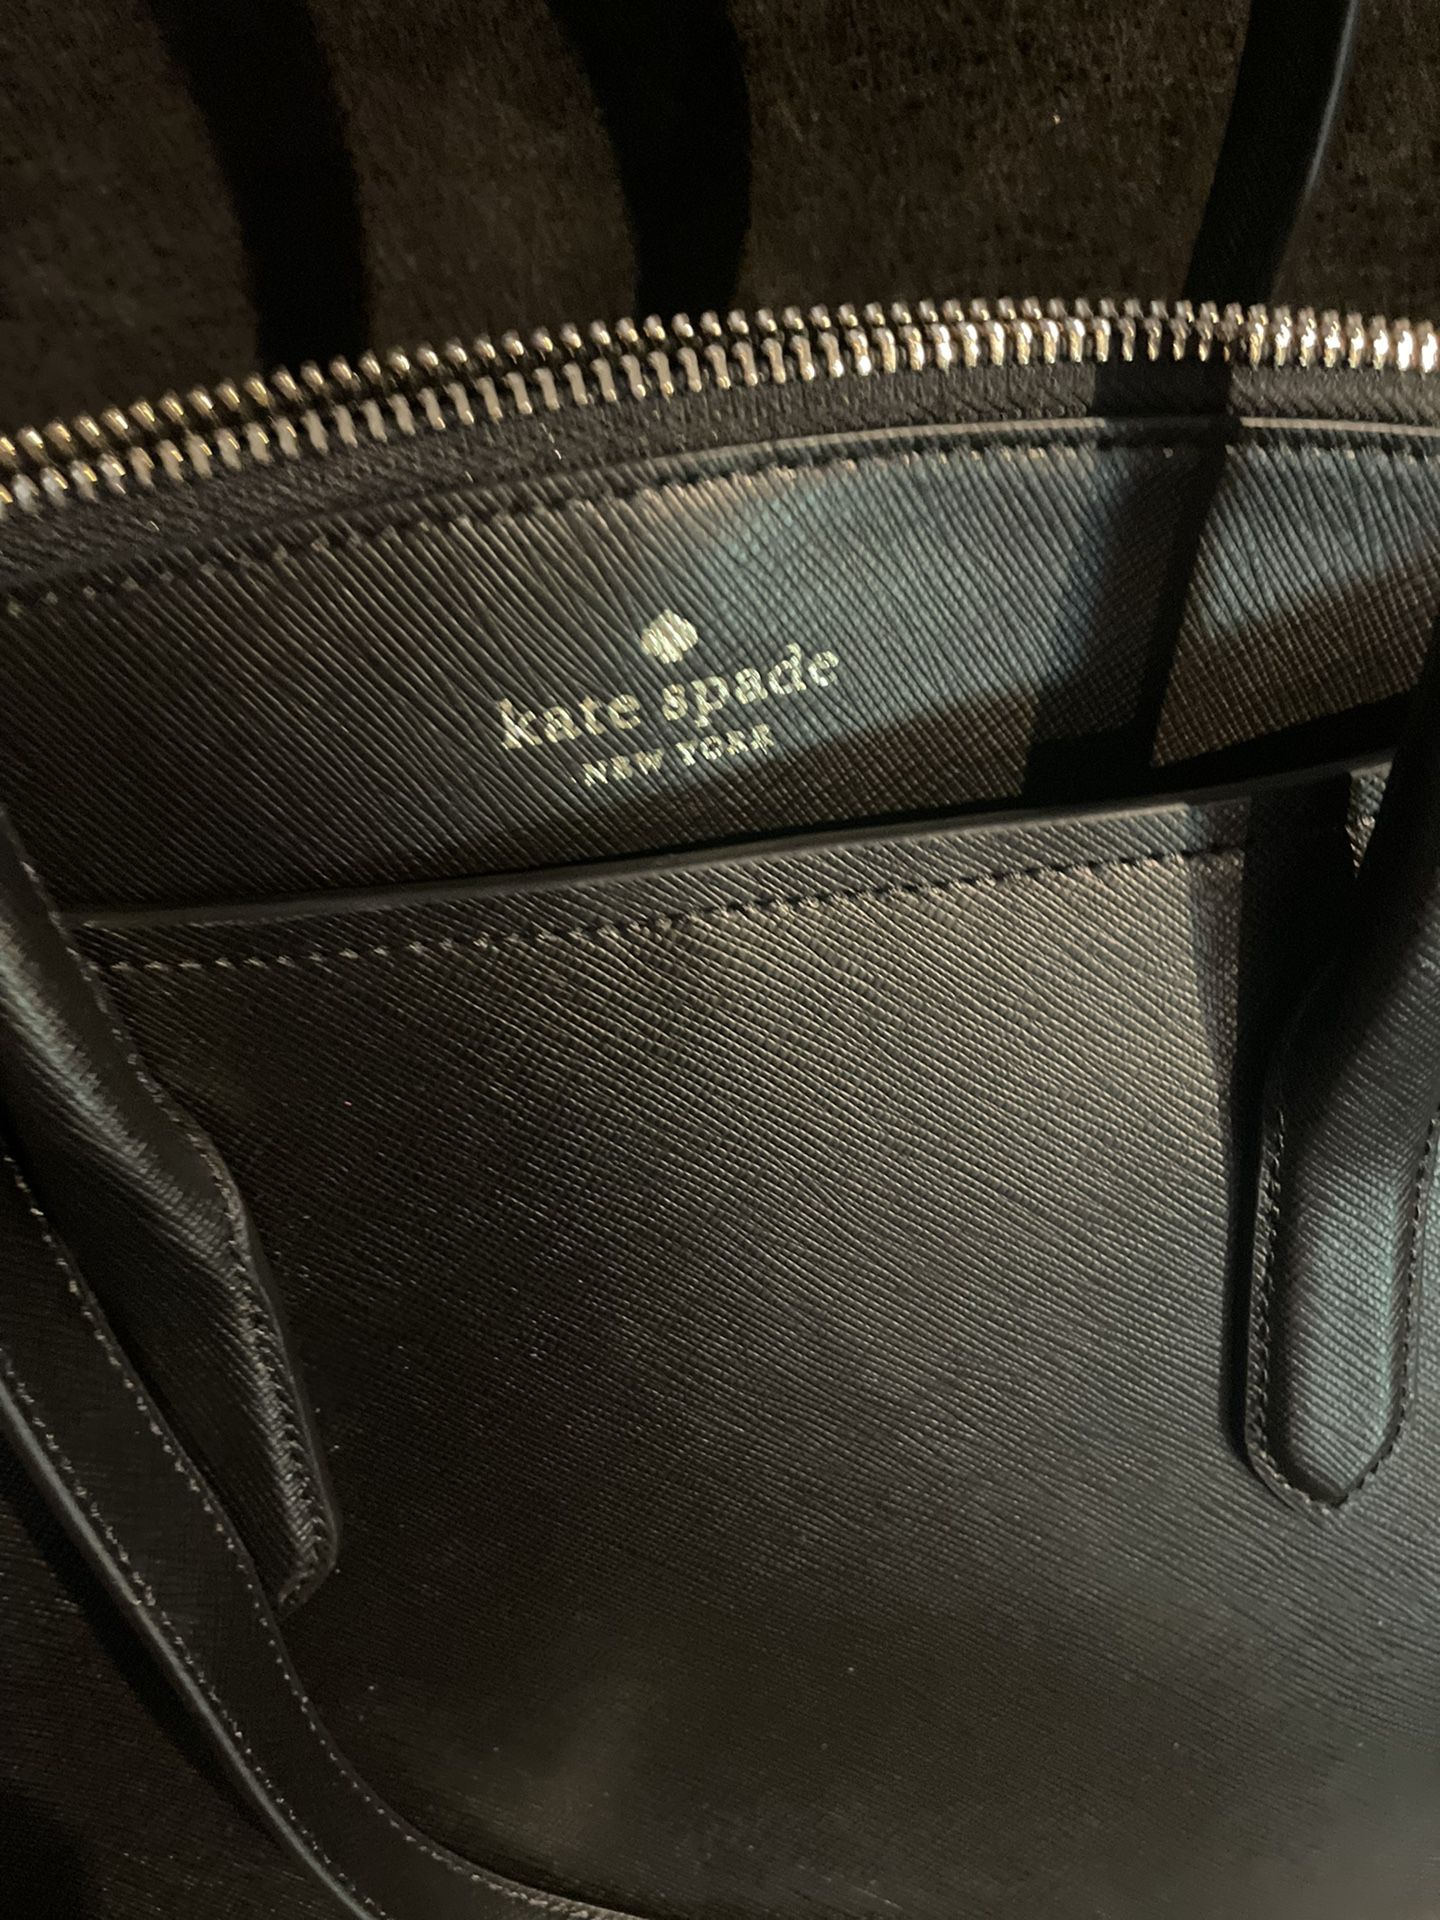 Kate Spade Medium Tote, Like New, Others Listed